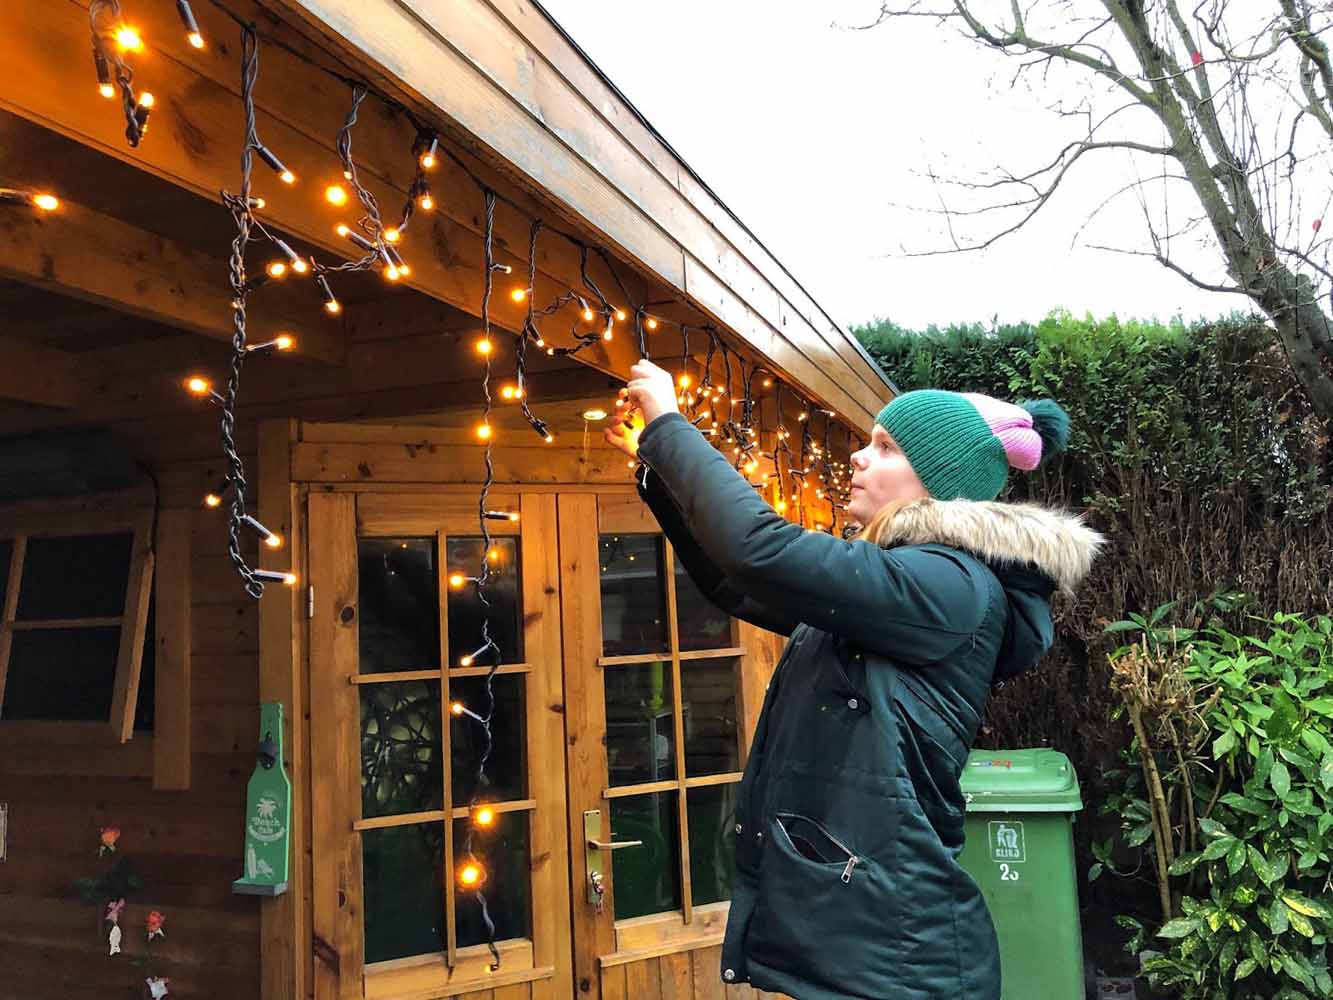 Girl hanging outdoor holiday lighting, practicing safe decorating habits by using outdoor rated lighting and equipment.